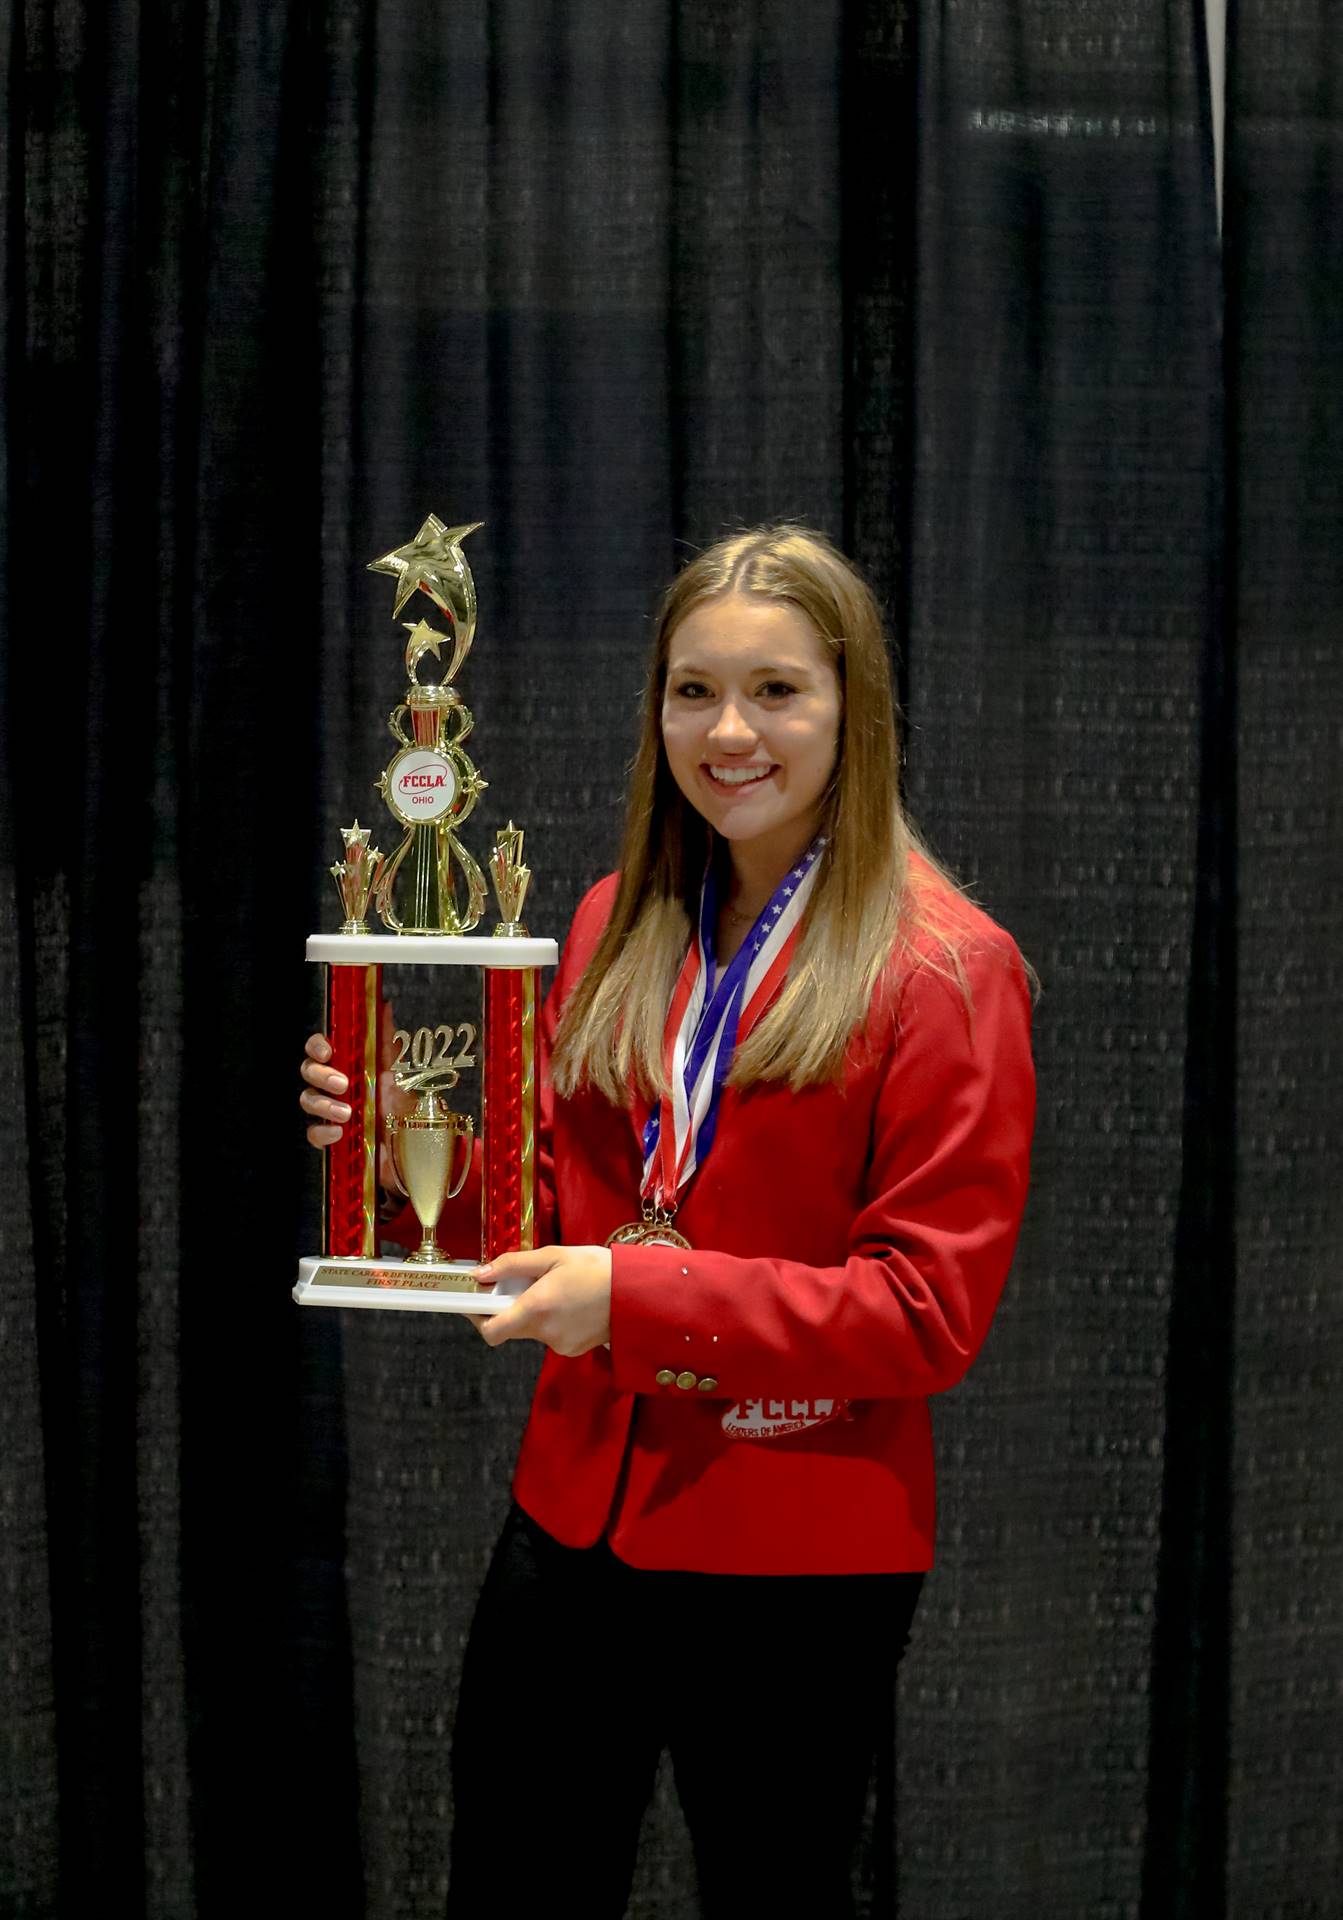 FCCLA Girl with Trophy